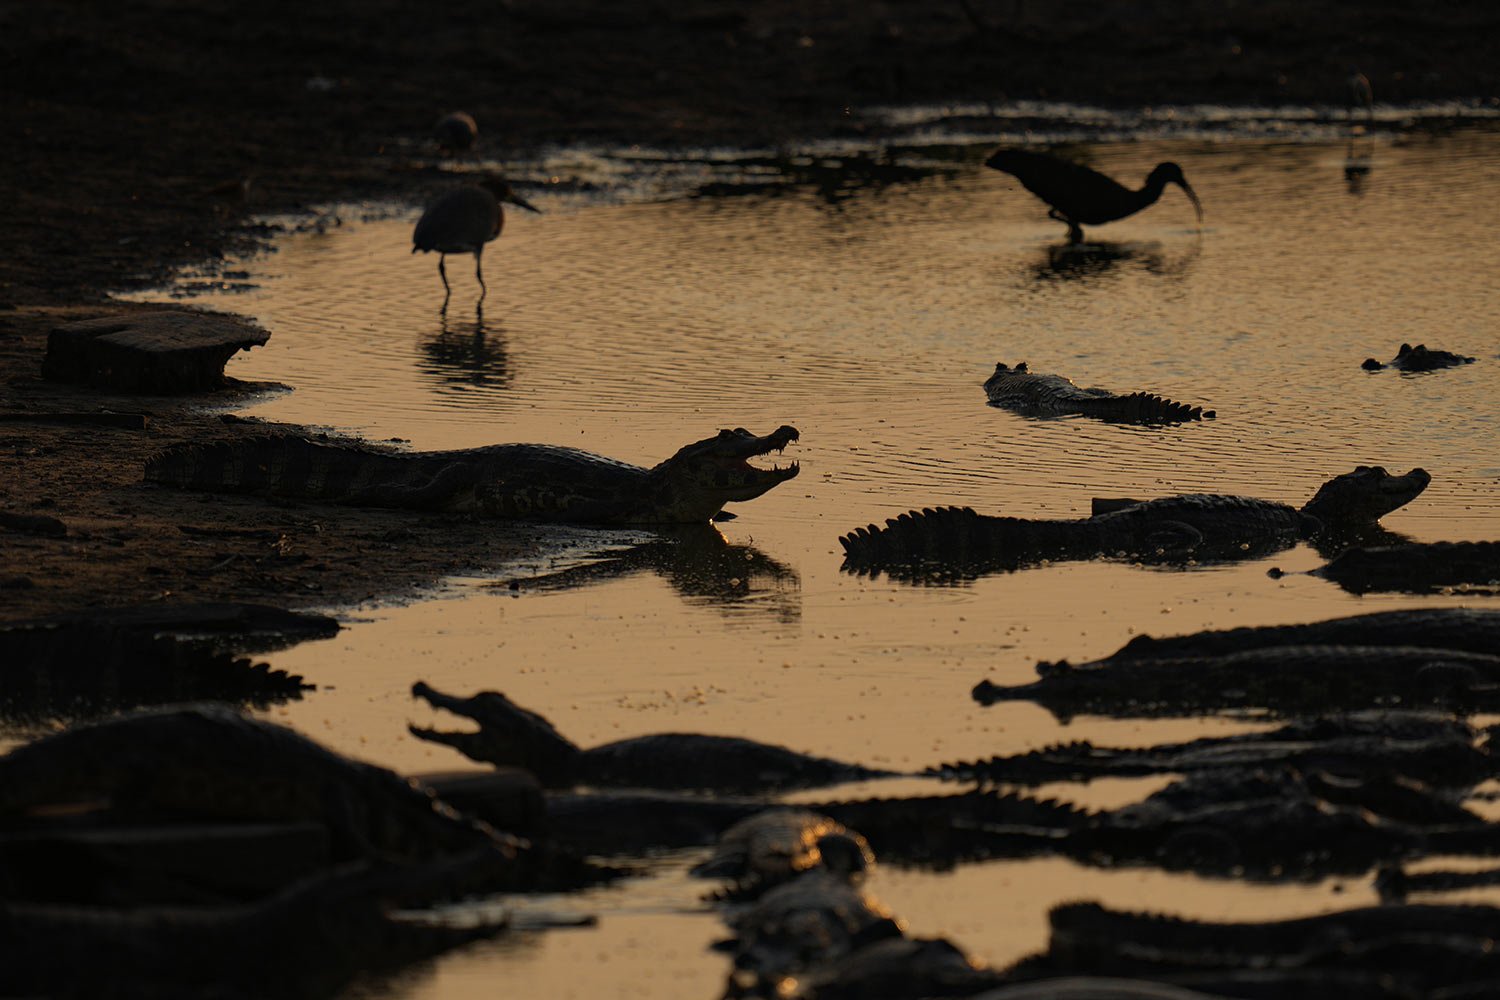  A group of caimans sit on the banks of the almost dried-up Bento Gomes River in the Pantanal wetlands near Pocone, Mato Grosso state, Brazil, Nov. 15, 2023. Amid the high heat, wildfires are burning widely in the Pantanal biome, the world's biggest 